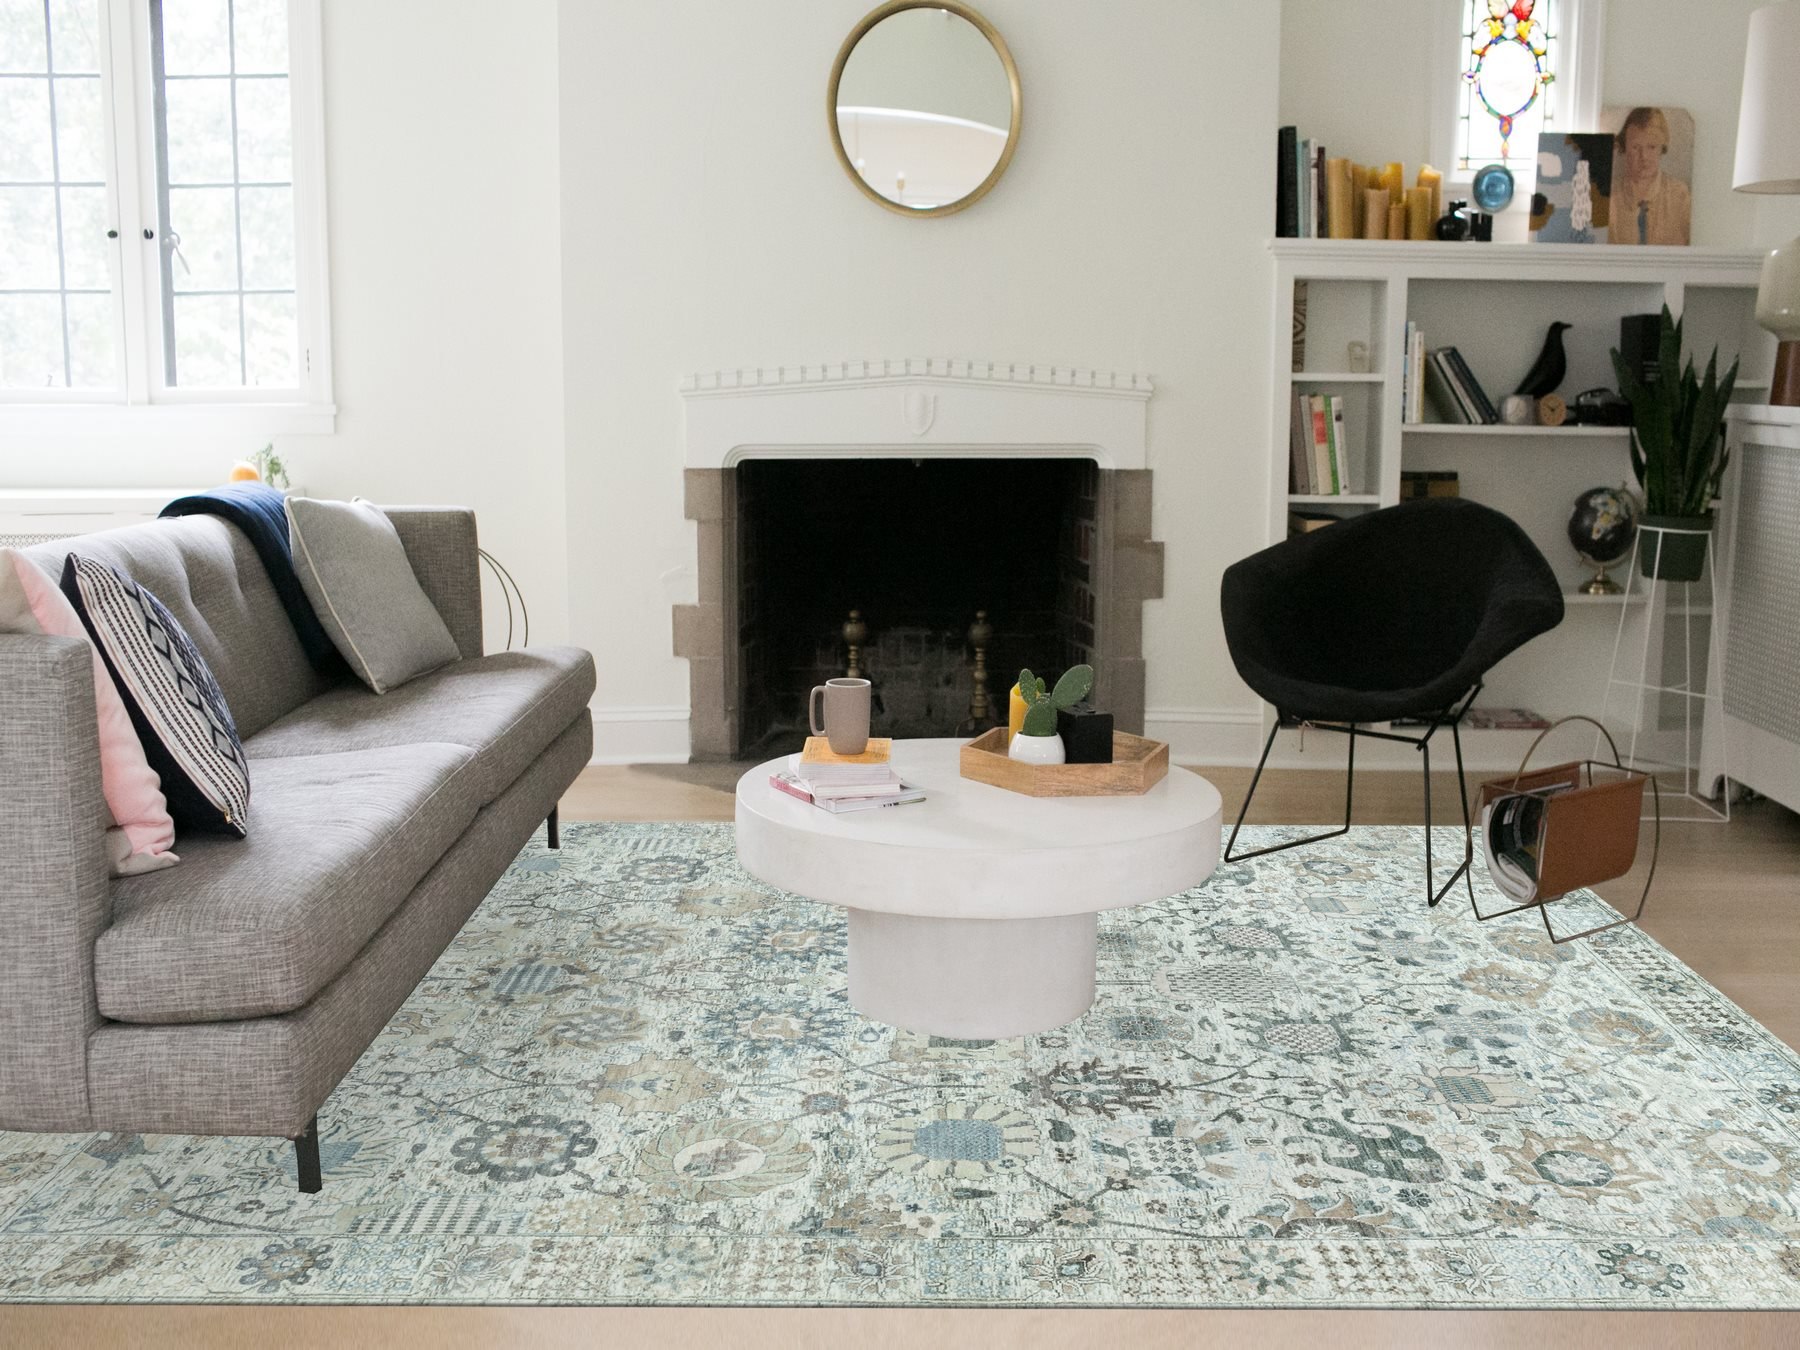 TransitionalRugs ORC816084